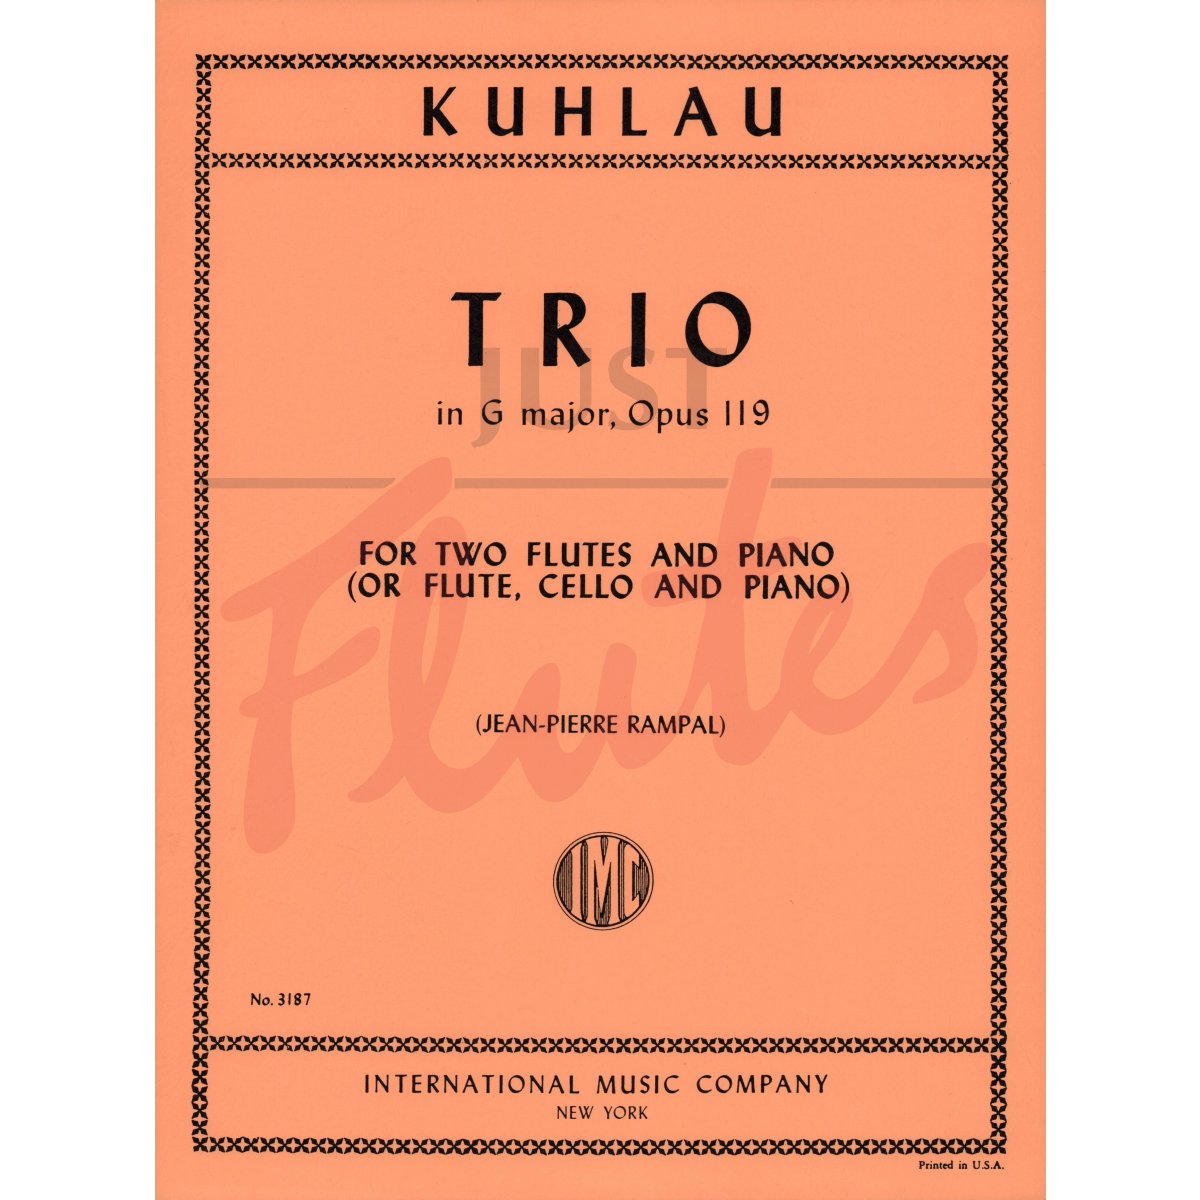 Trio in G major for Two Flutes (or Flute and Cello) and Piano